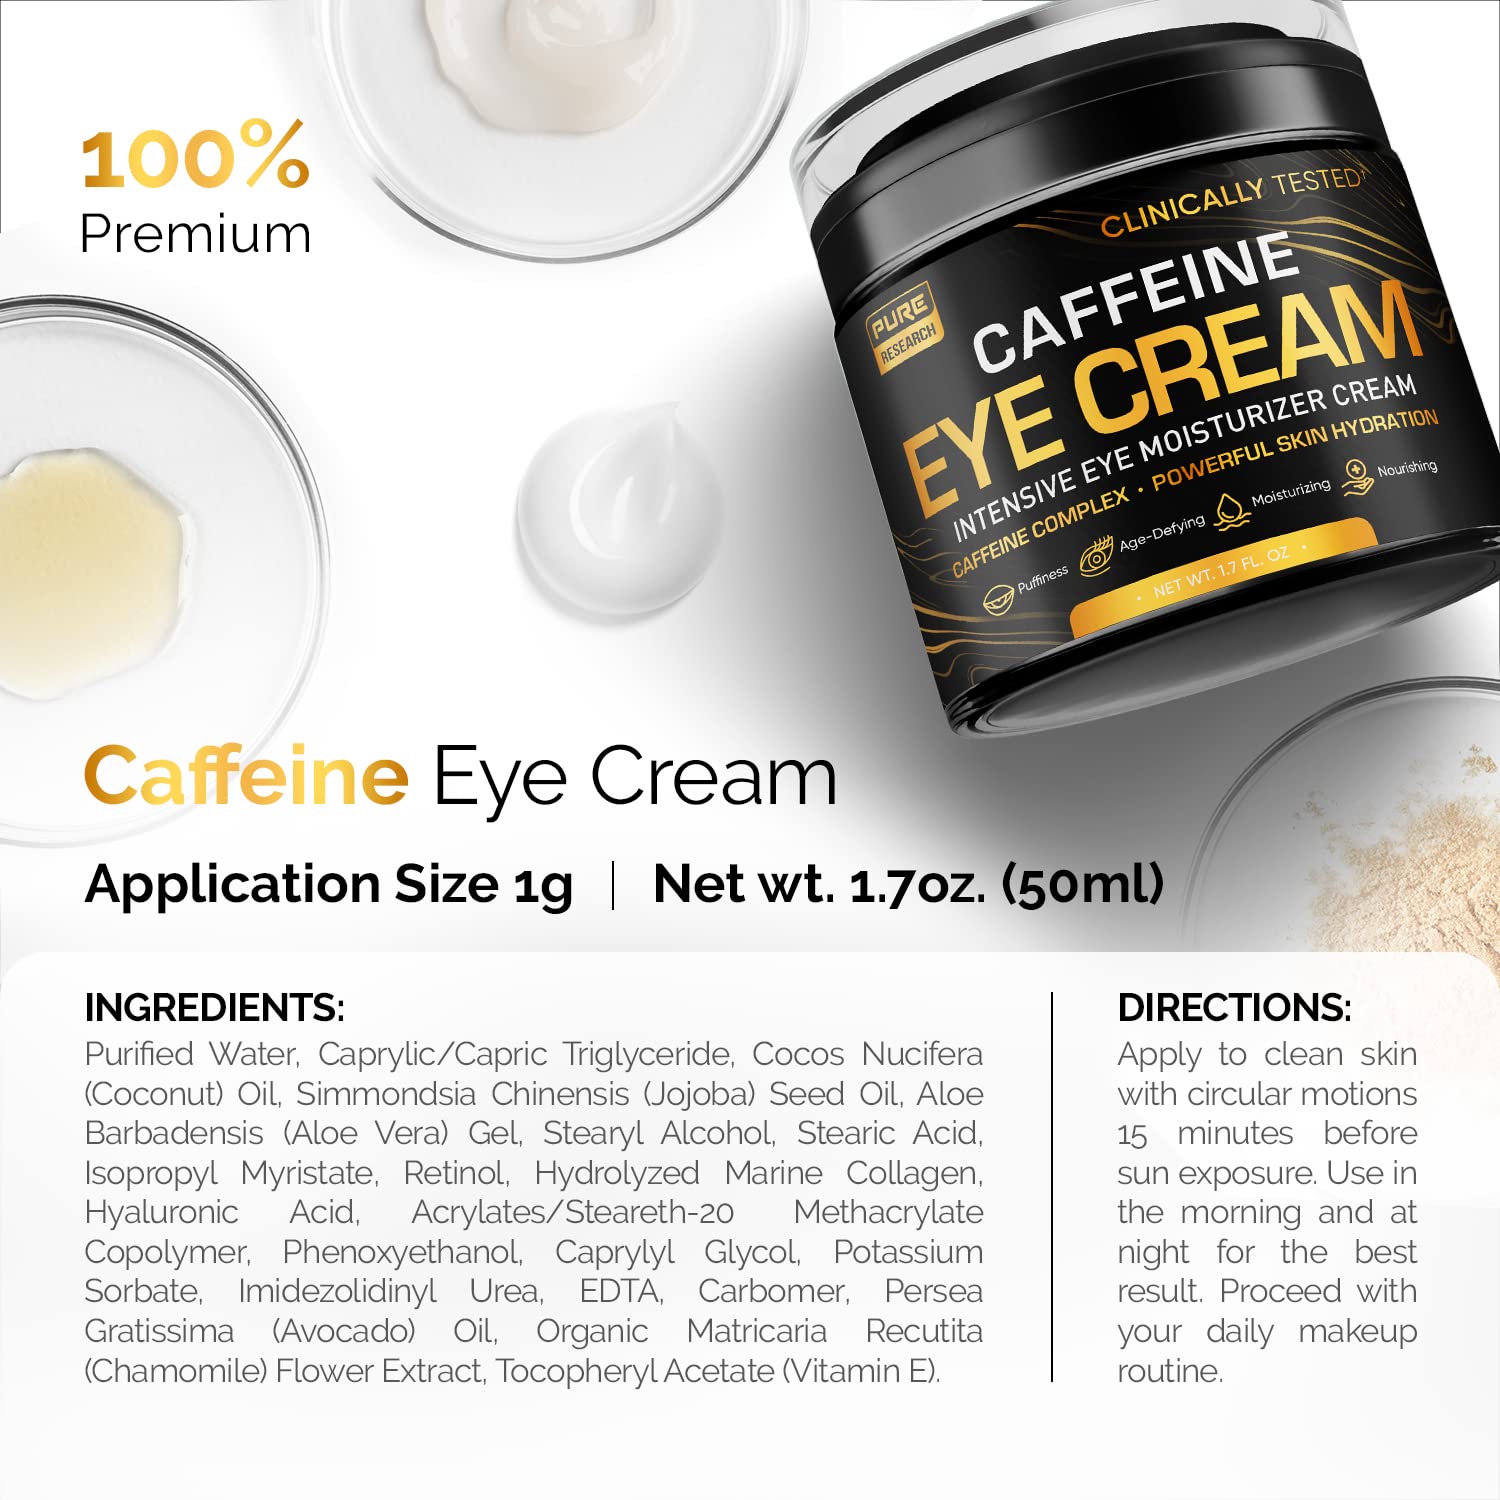 Caffeine Eye Cream For Anti Aging, Dark Circles, Bags, Puffiness. Great Under Eye Skin + Face Tightening, Eye Lift Treatment For Men & Women 1.7oz : Beauty & Personal Care